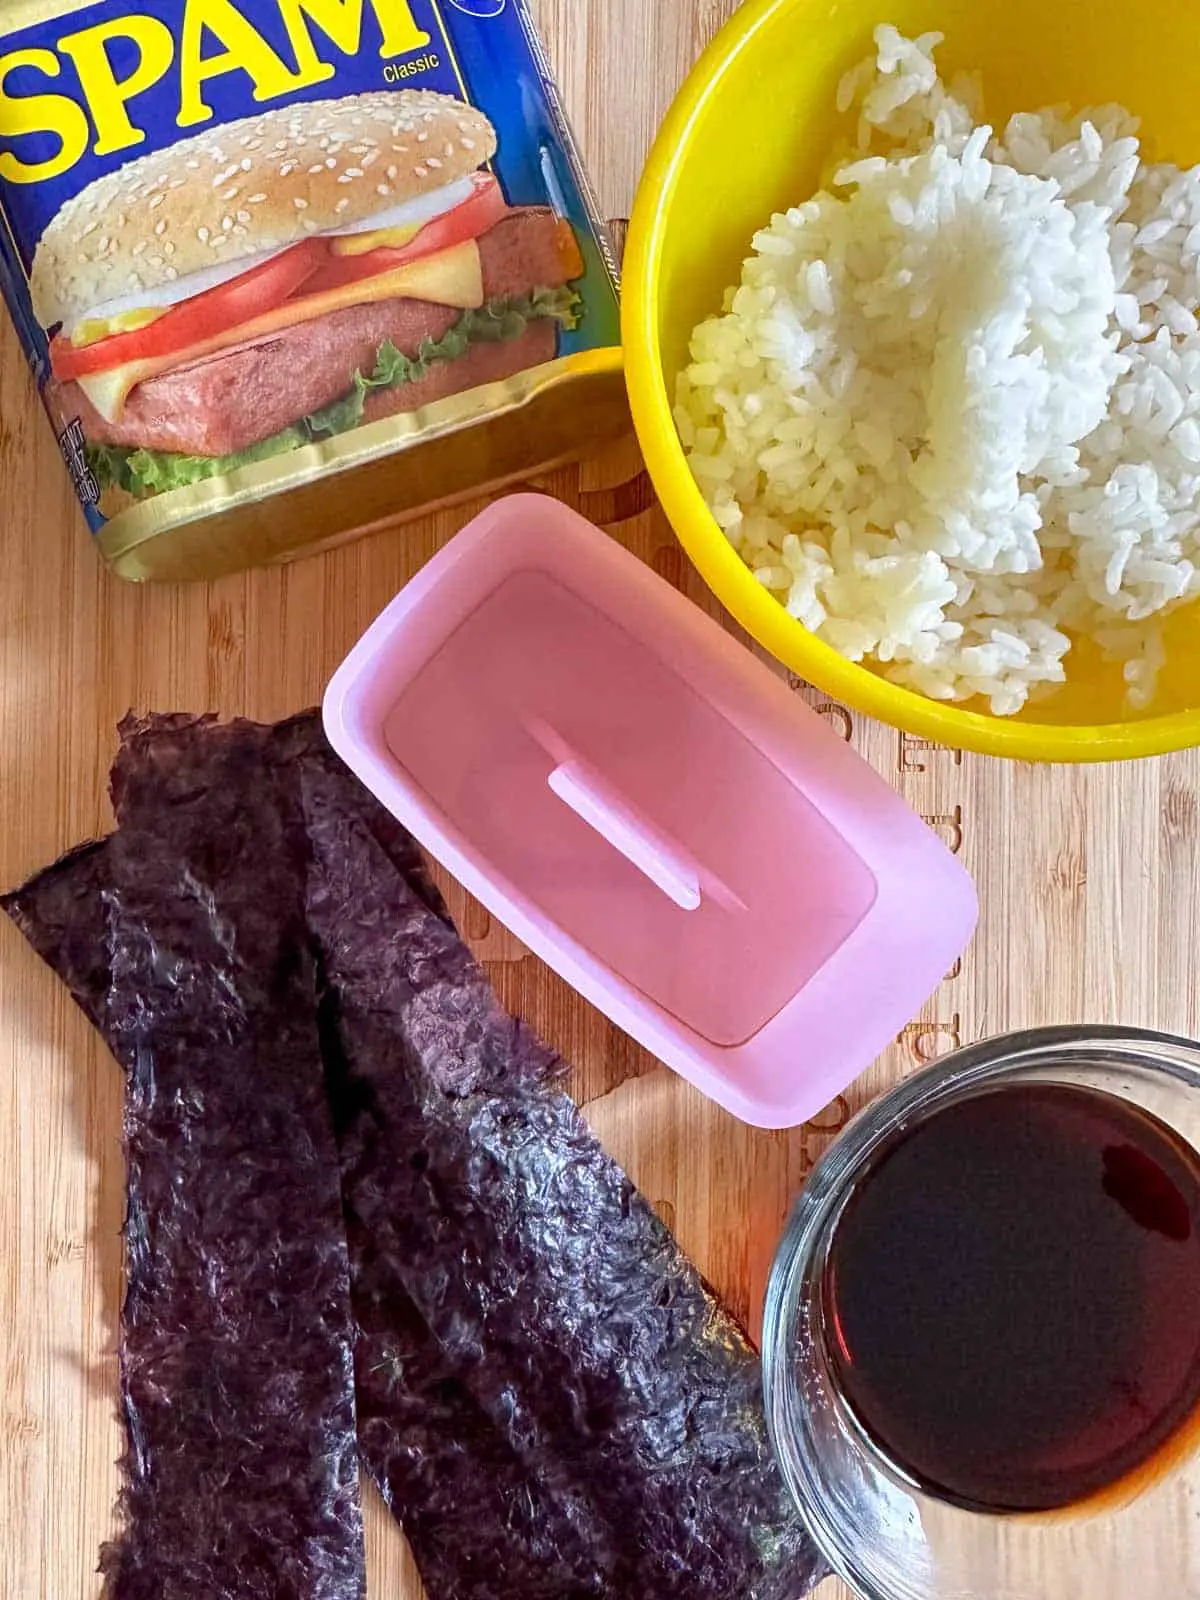 A can of Spam, a yellow bowl with cooked rice, a pink musubi maker, strips of nori, and a glass bowl with soy sauce.